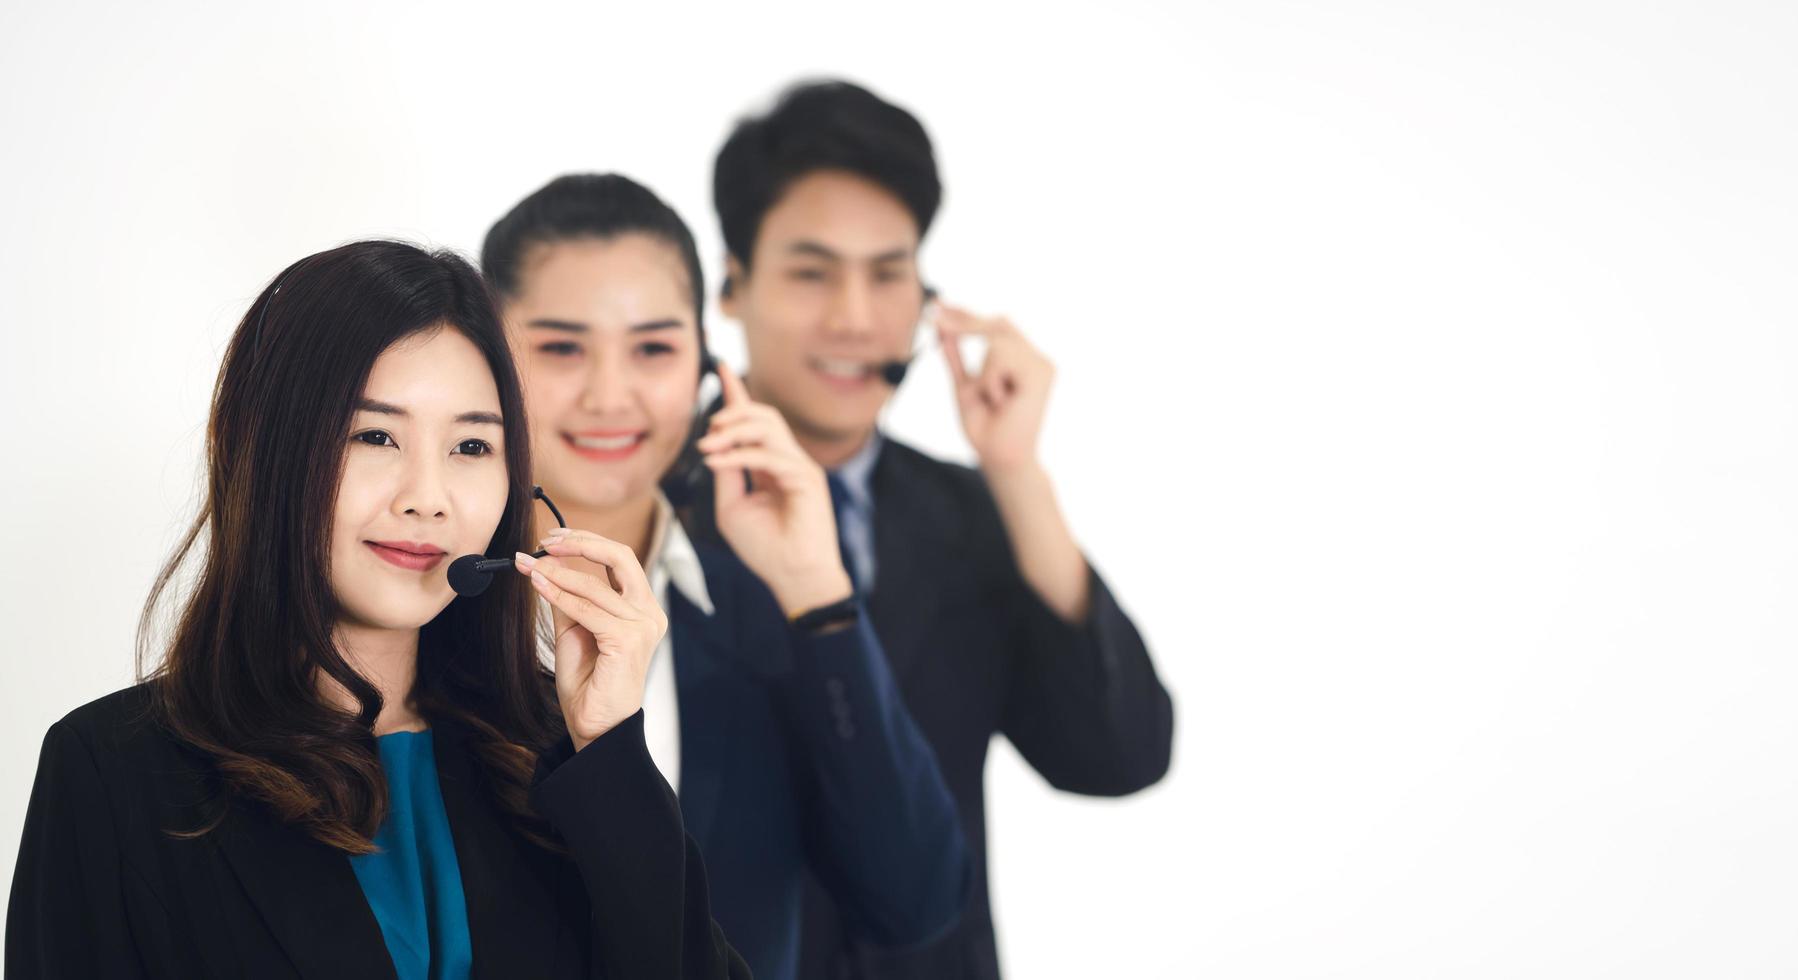 Portrait of positive smile young business staff asian call center team woman and man photo